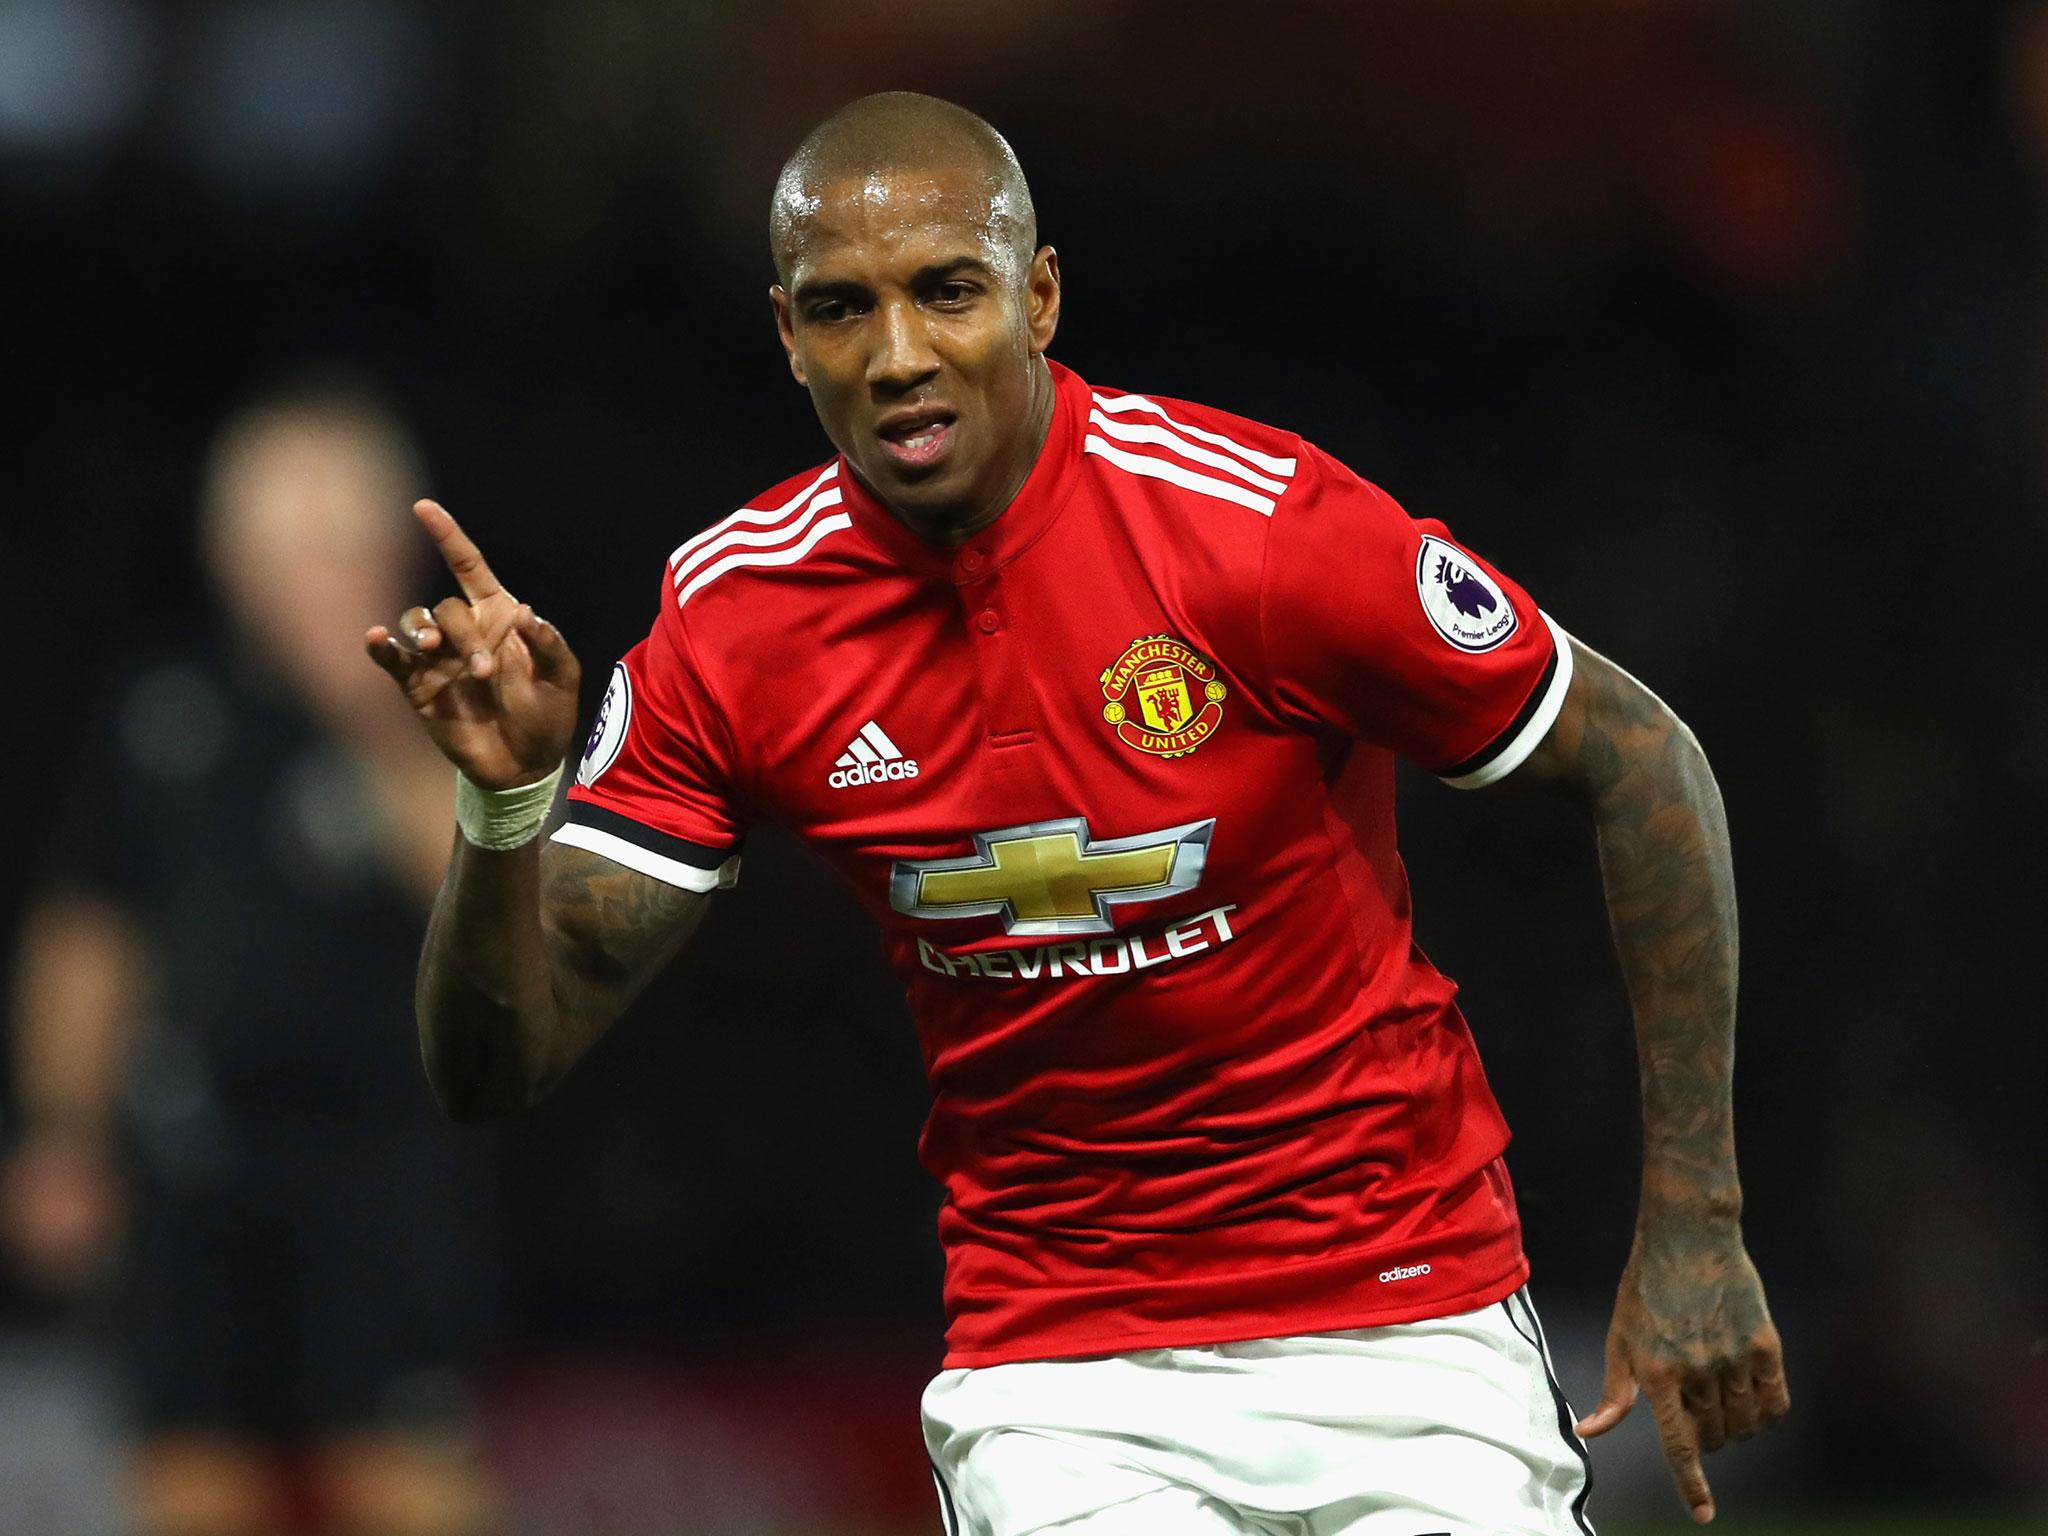 Ashley Young scored his first brace in five years for Manchester United